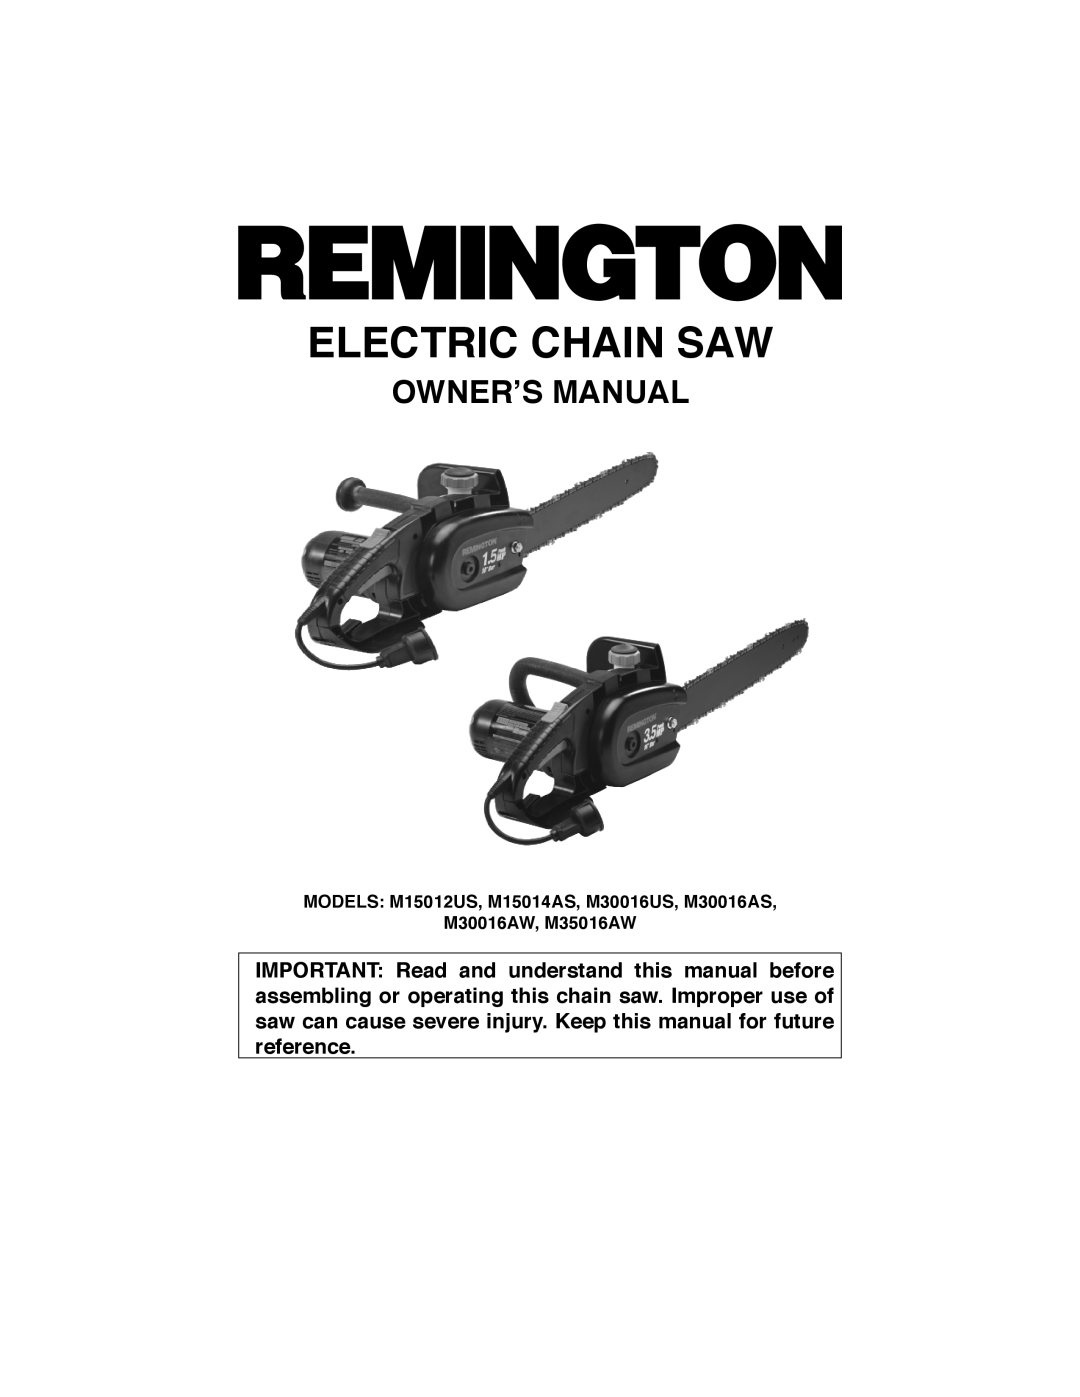 Remington Power Tools M15014AS, M30016AS, M15012US, M35016AW, M30016US owner manual Electric Chain Saw, Owner’S Manual 